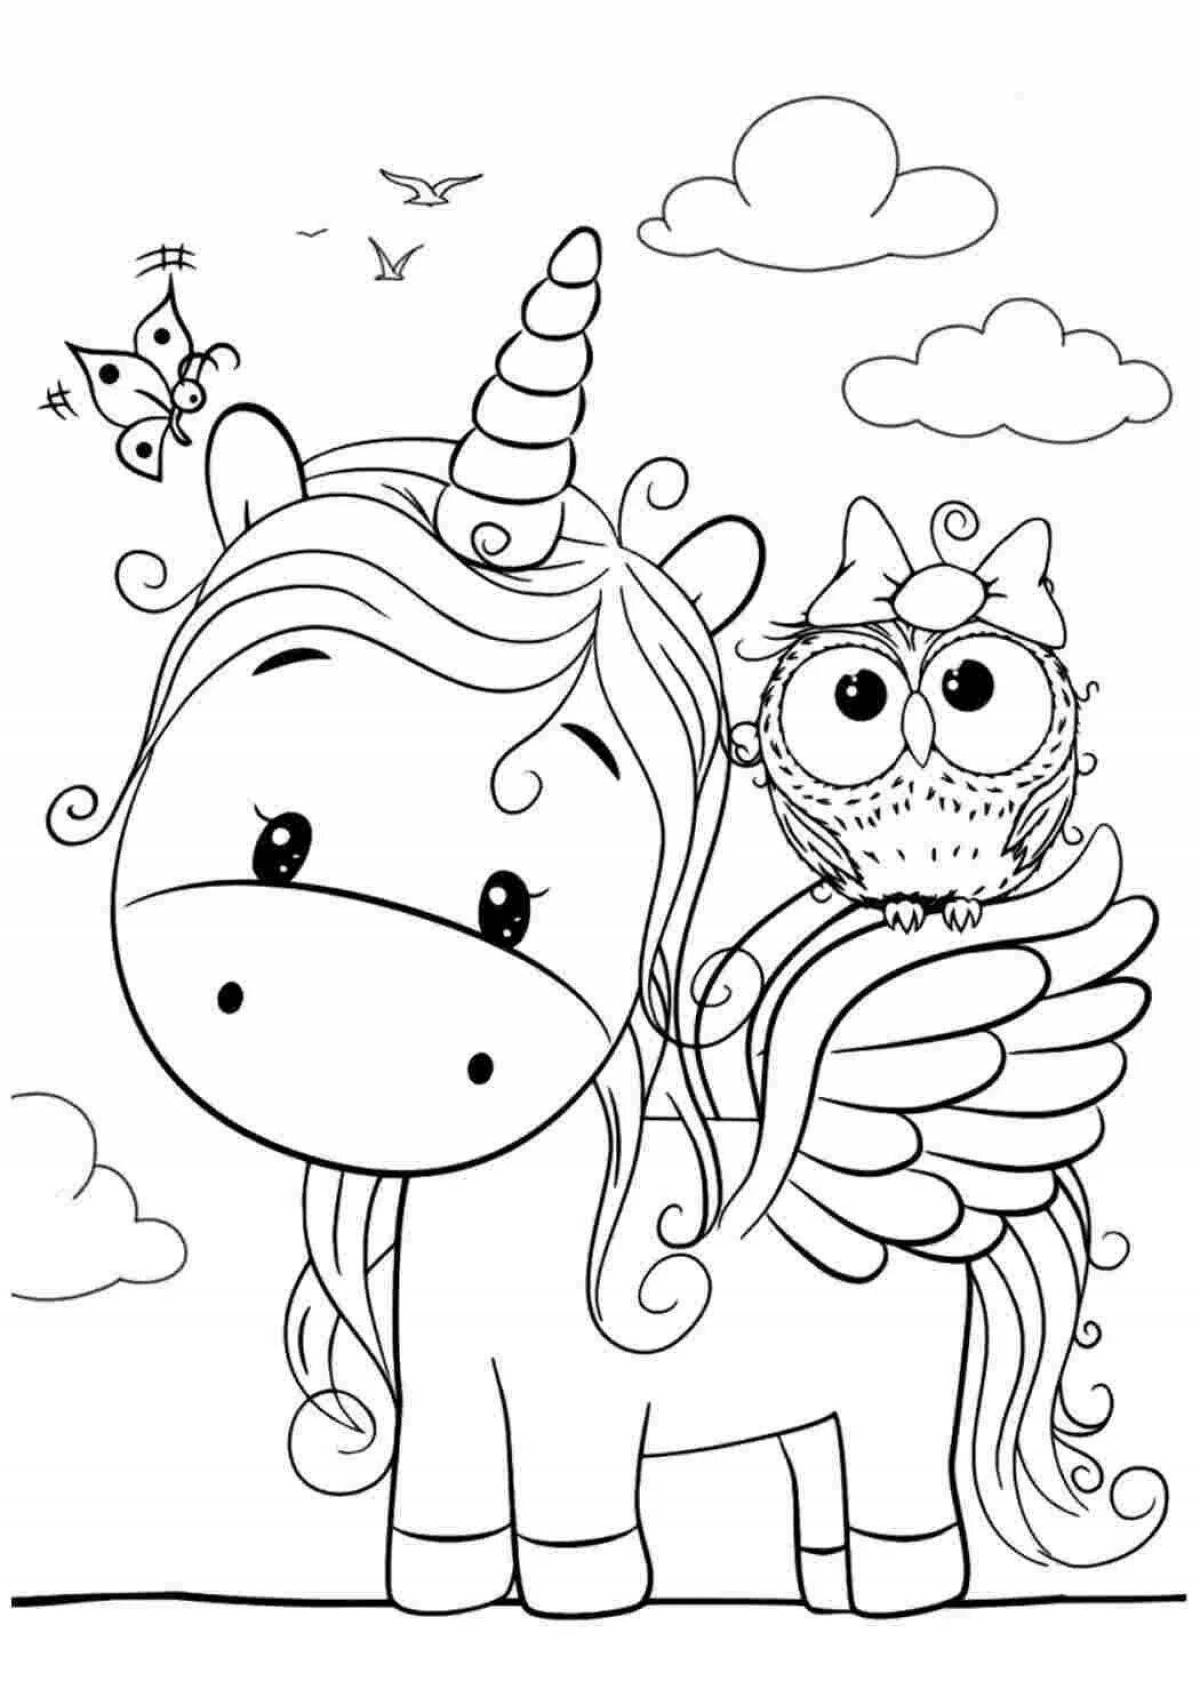 Dreamy coloring book for girls with unicorn print